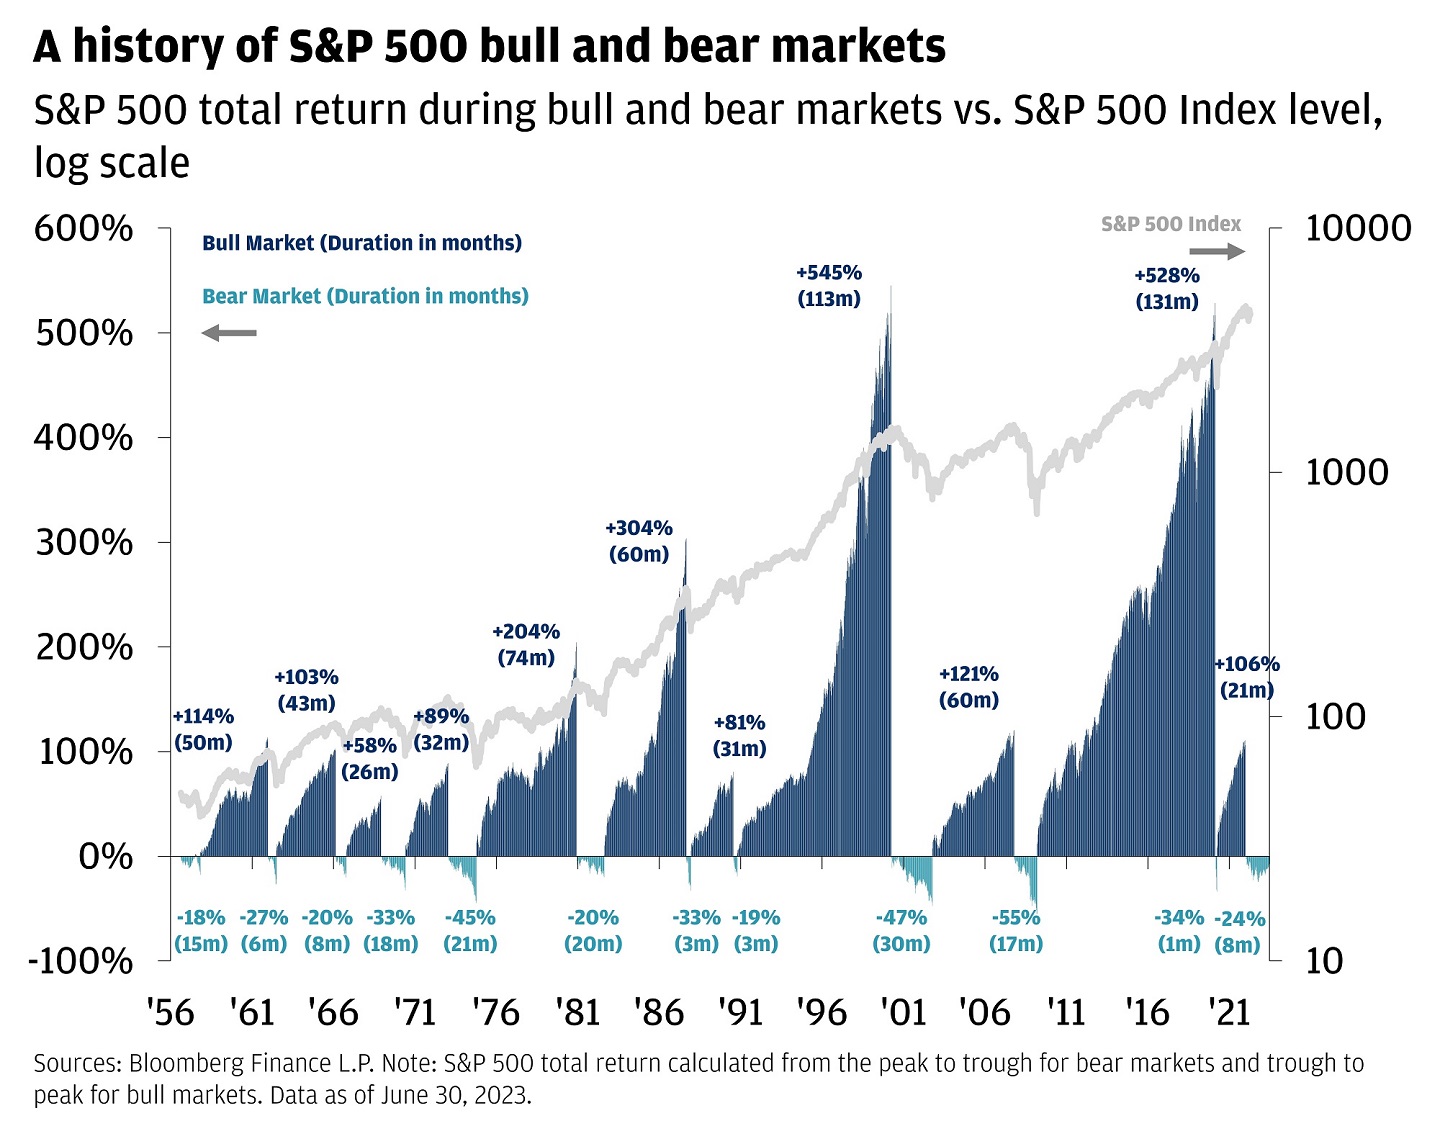 The chart describes a history of S&P 500 bull and bear markets and it’s done in a clustered column format. The left-hand axis is the magnitude of bull & bear markets in terms of % of total gain or total drawdown (S&P 500 total return) and the right-hand axis is the S&P 500 index level (log scale).